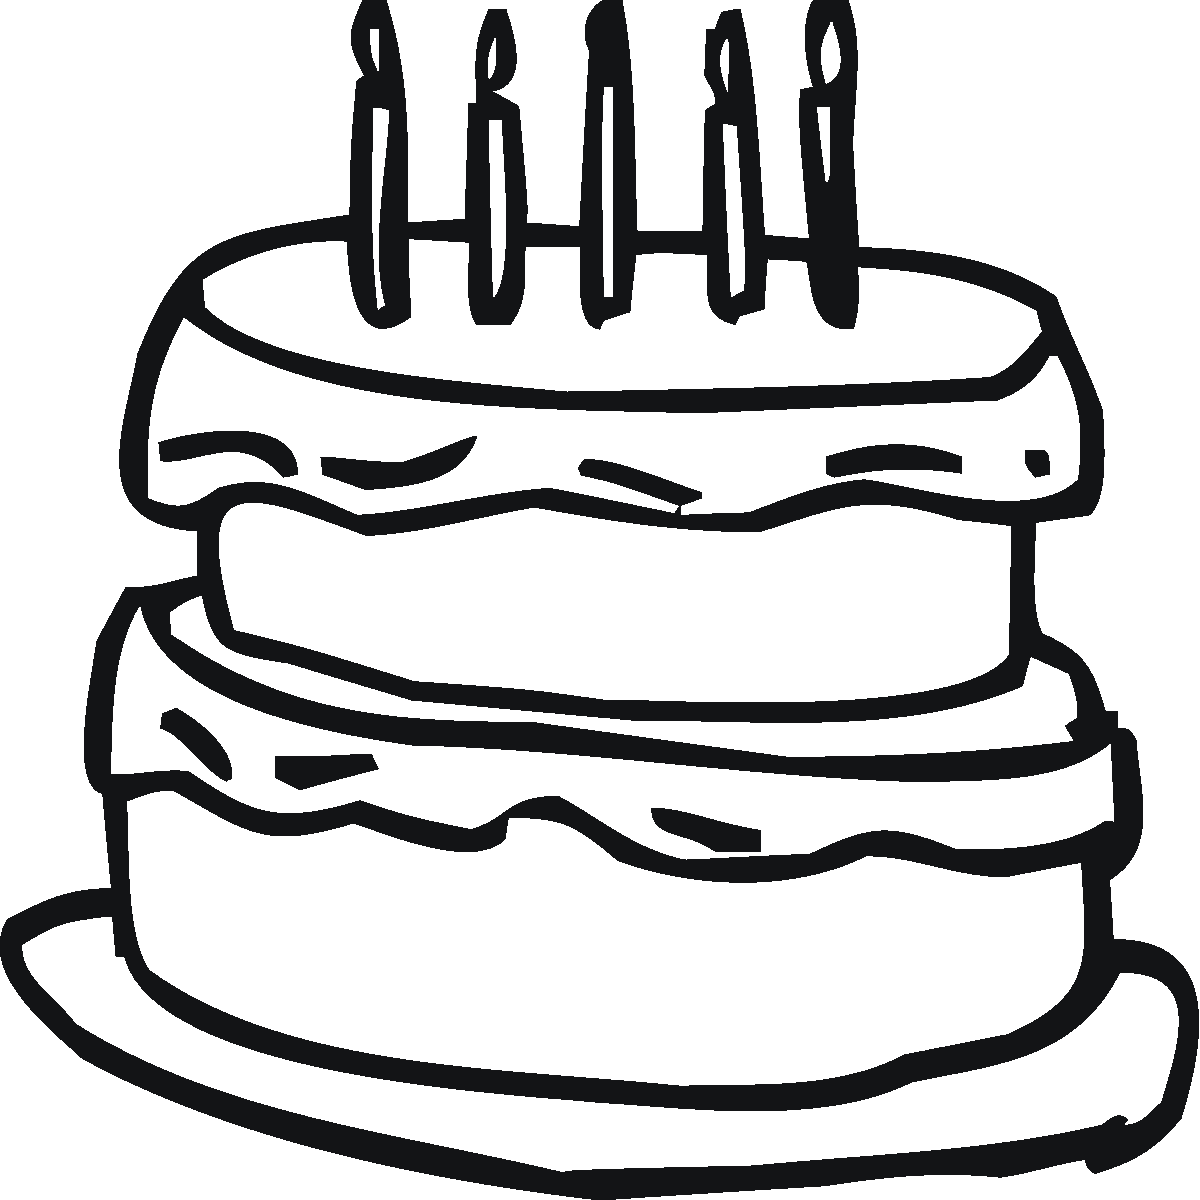 Birthday Cake Coloring Pages - Free Large Images